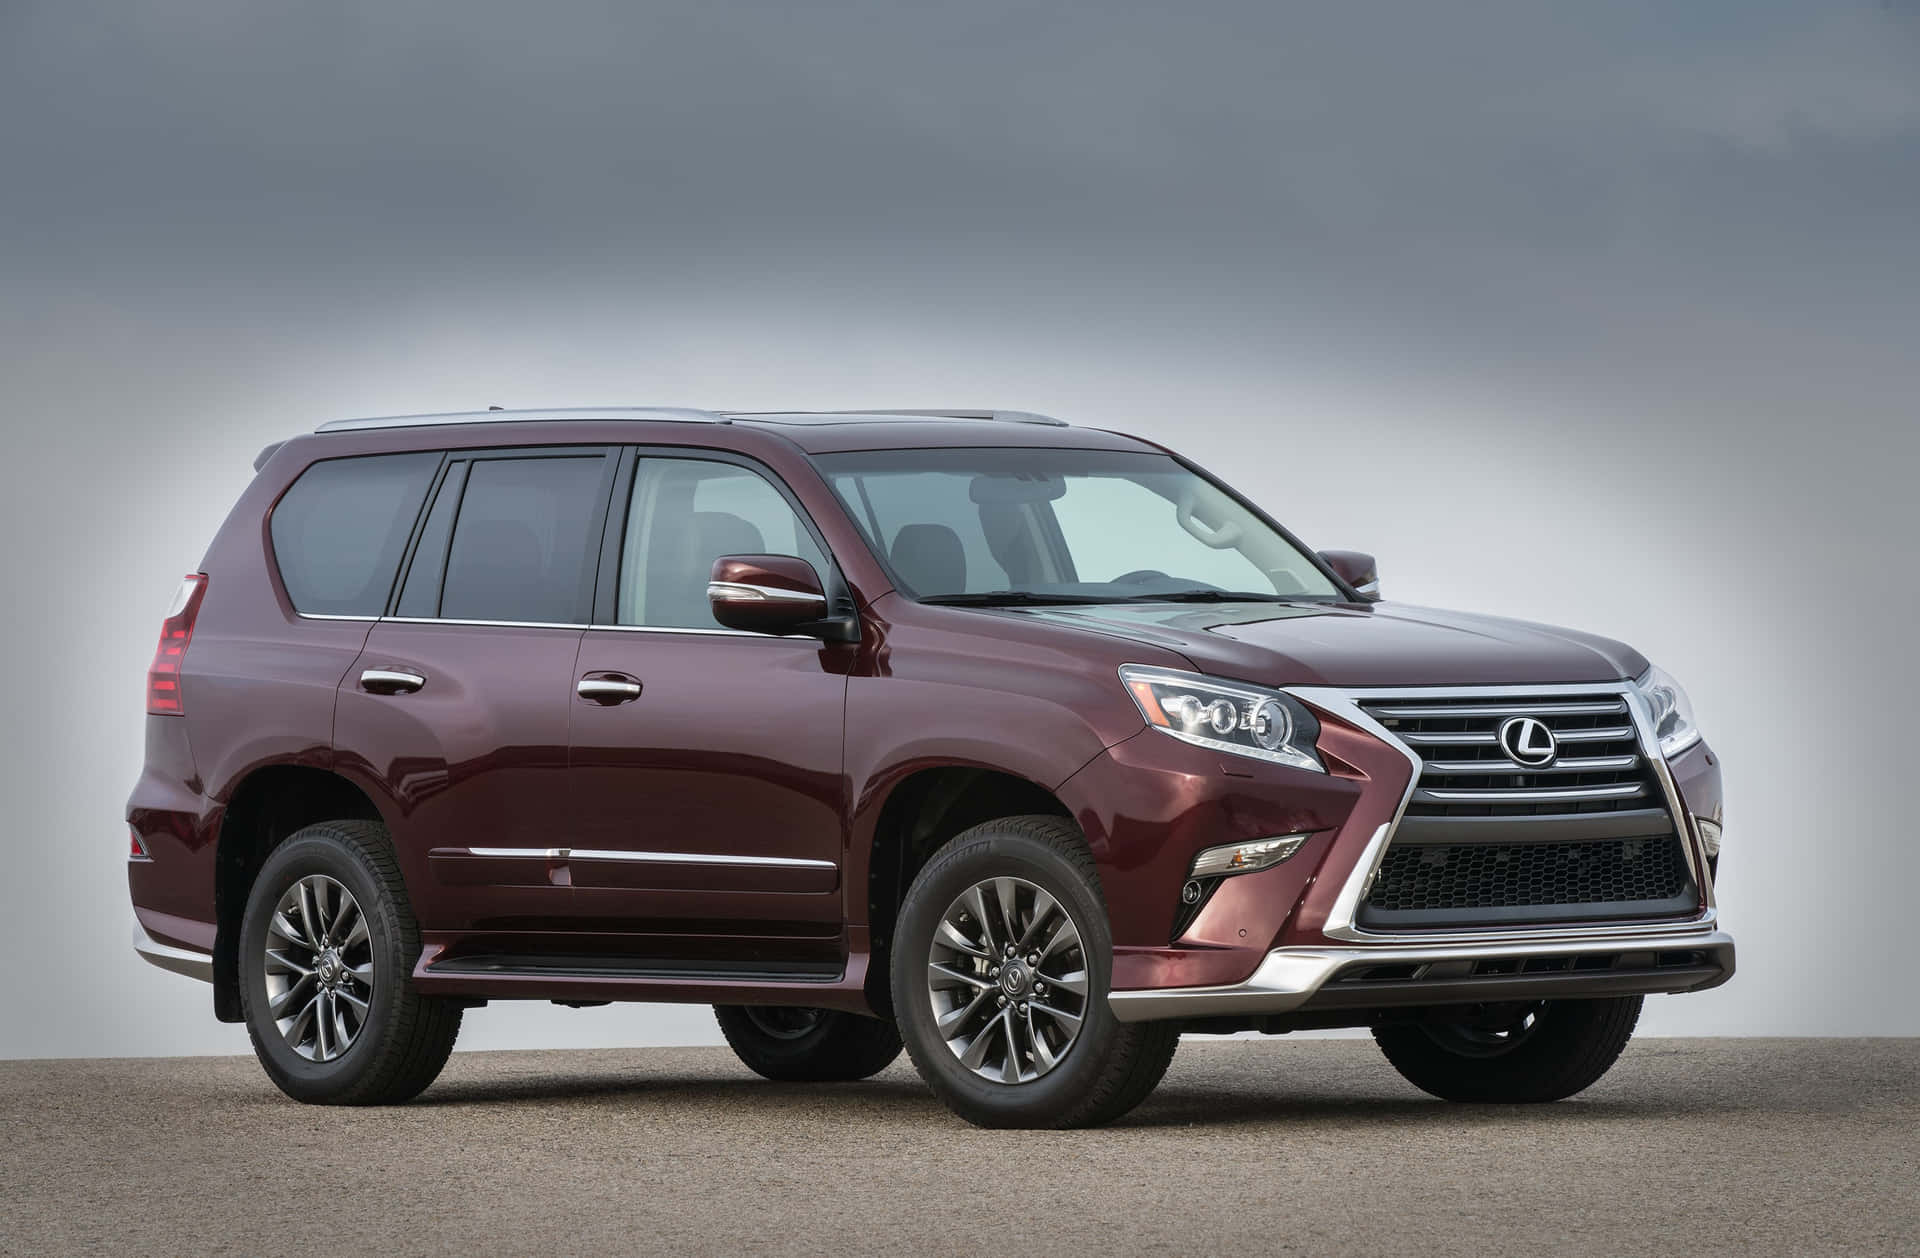 Elegant Lexus GX 460 - A Perfect Blend of Luxury and Performance Wallpaper